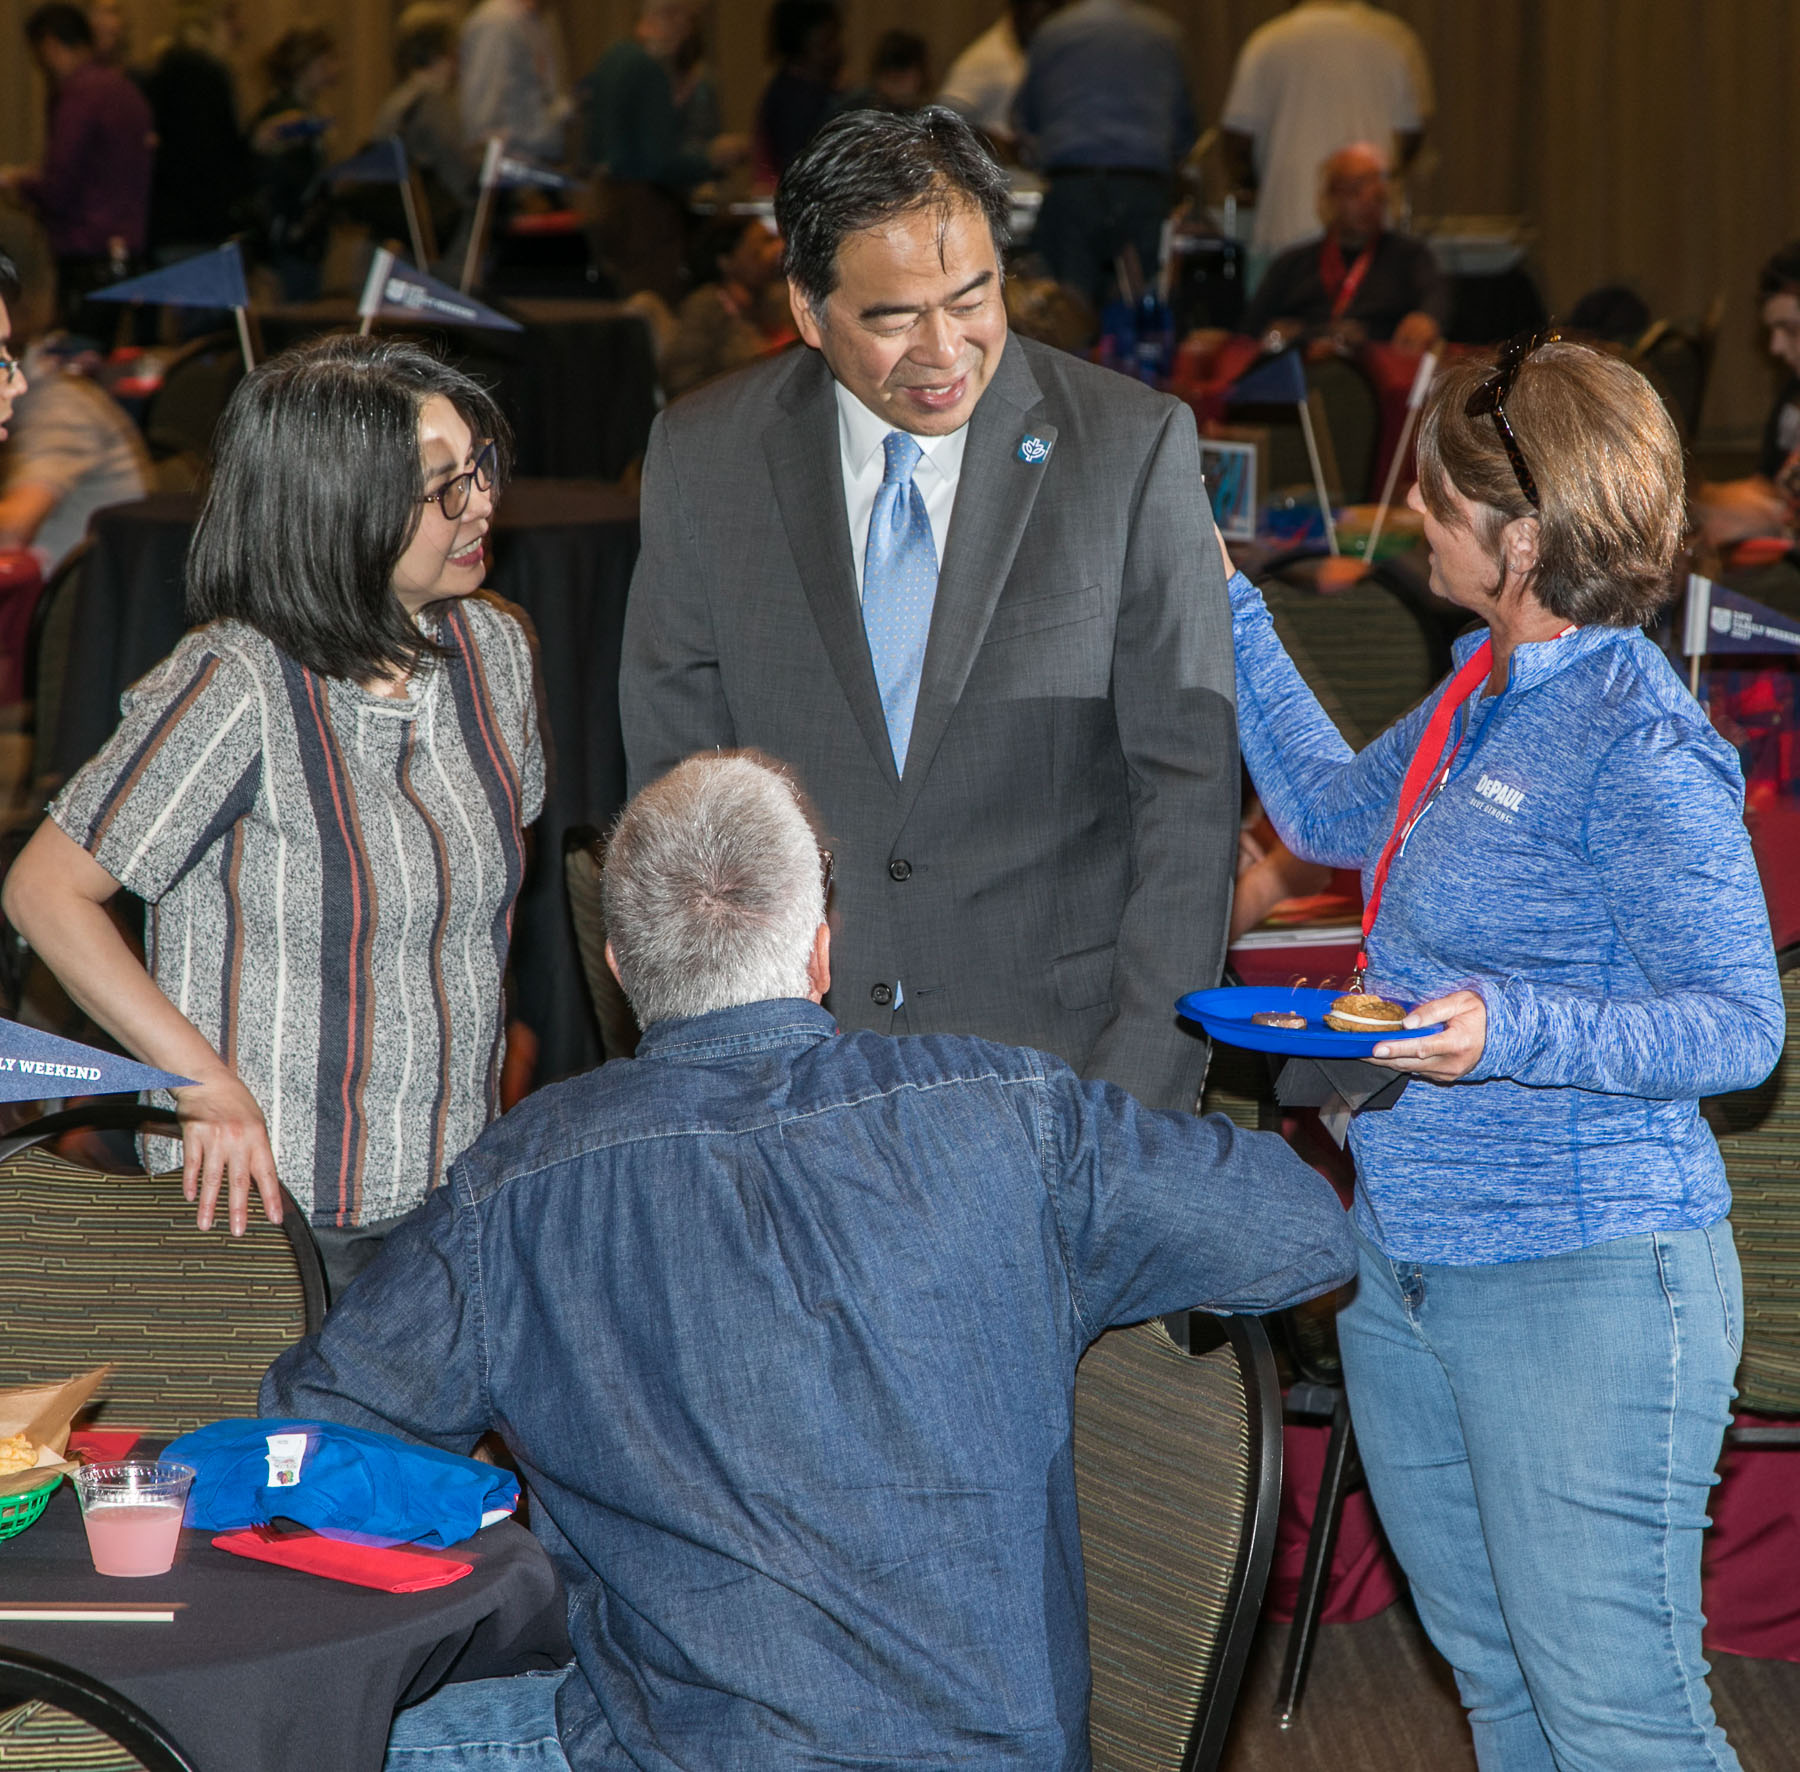 Josephine Esteban, left, and DePaul University President A. Gabriel Esteban, Ph.D., center, greet guests as students and family members gather for a buffet dinner and student performances at the Family Weekend Kickoff celebration. (DePaul University/Jamie Moncrief)